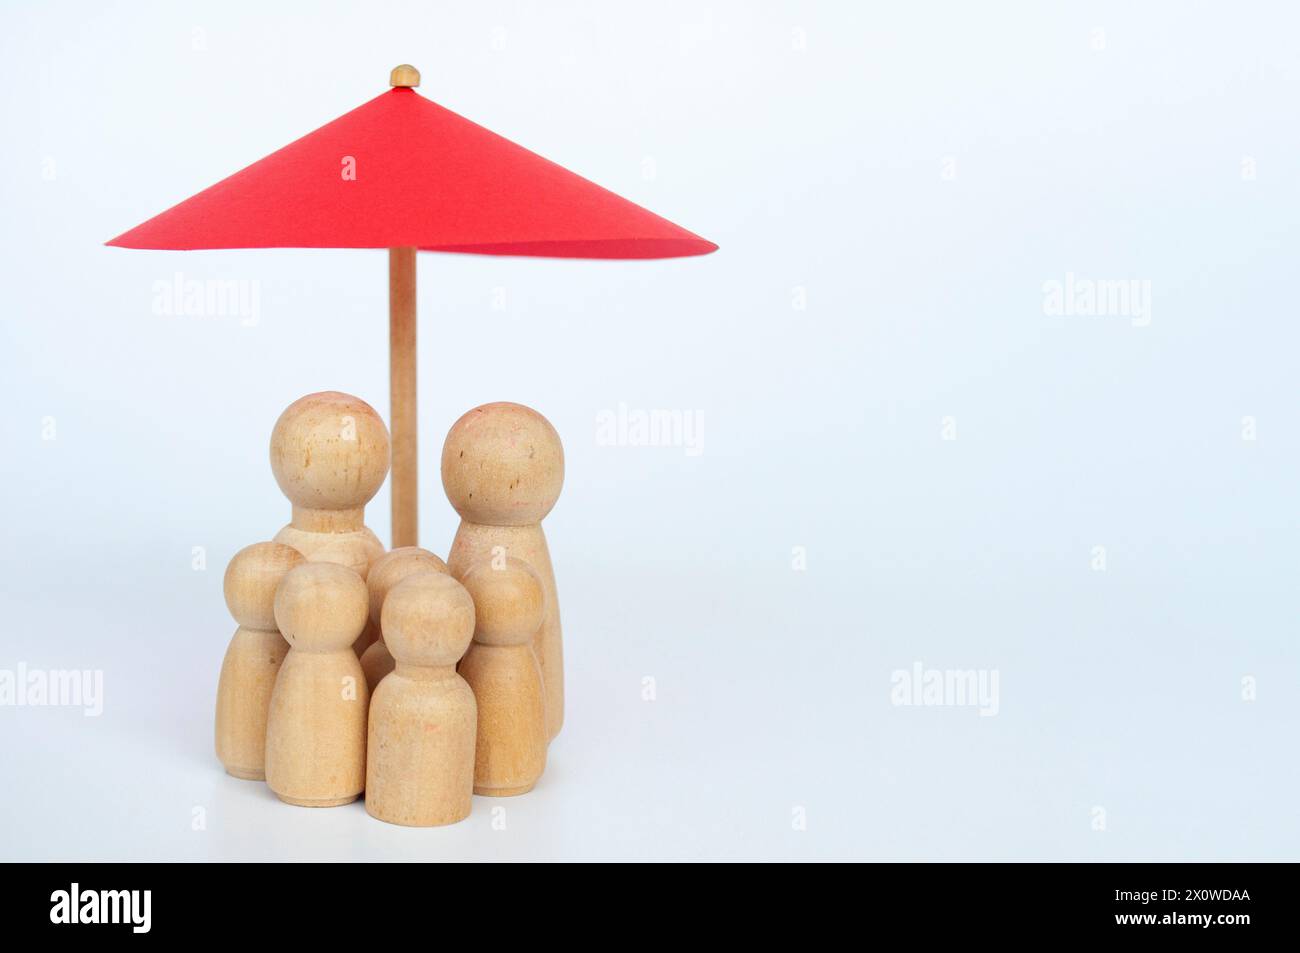 Red toy umbrella and wooden family doll figures a white background. Life insurance coverage concept. Stock Photo